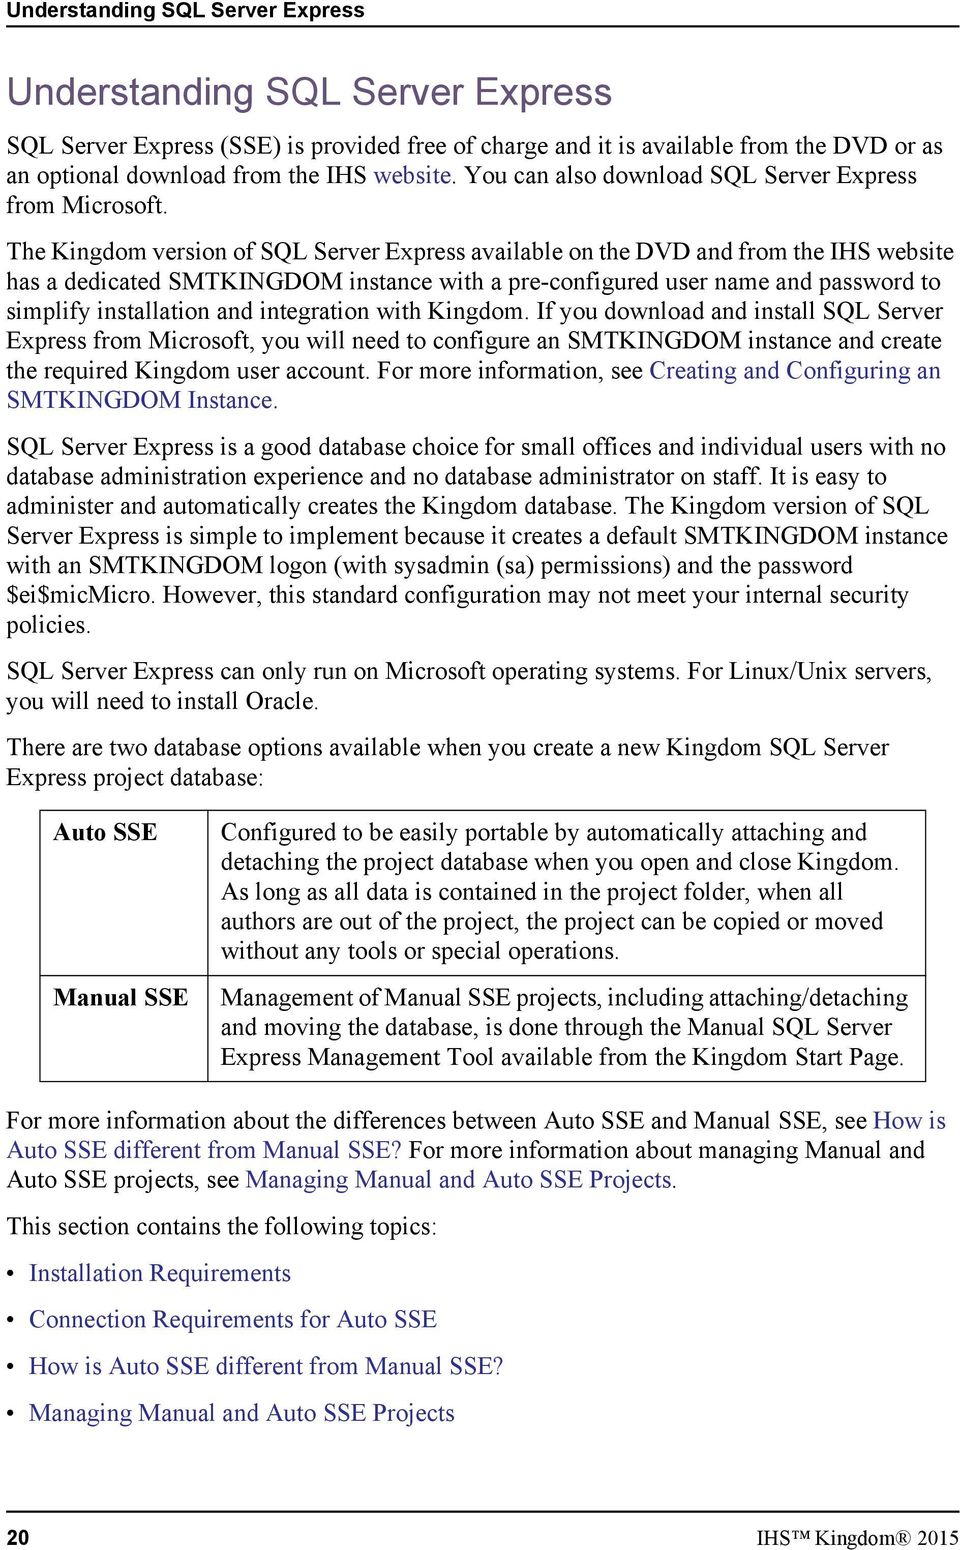 The Kingdom version of SQL Server Express available on the DVD and from the IHS website has a dedicated SMTKINGDOM instance with a pre-configured user name and password to simplify installation and